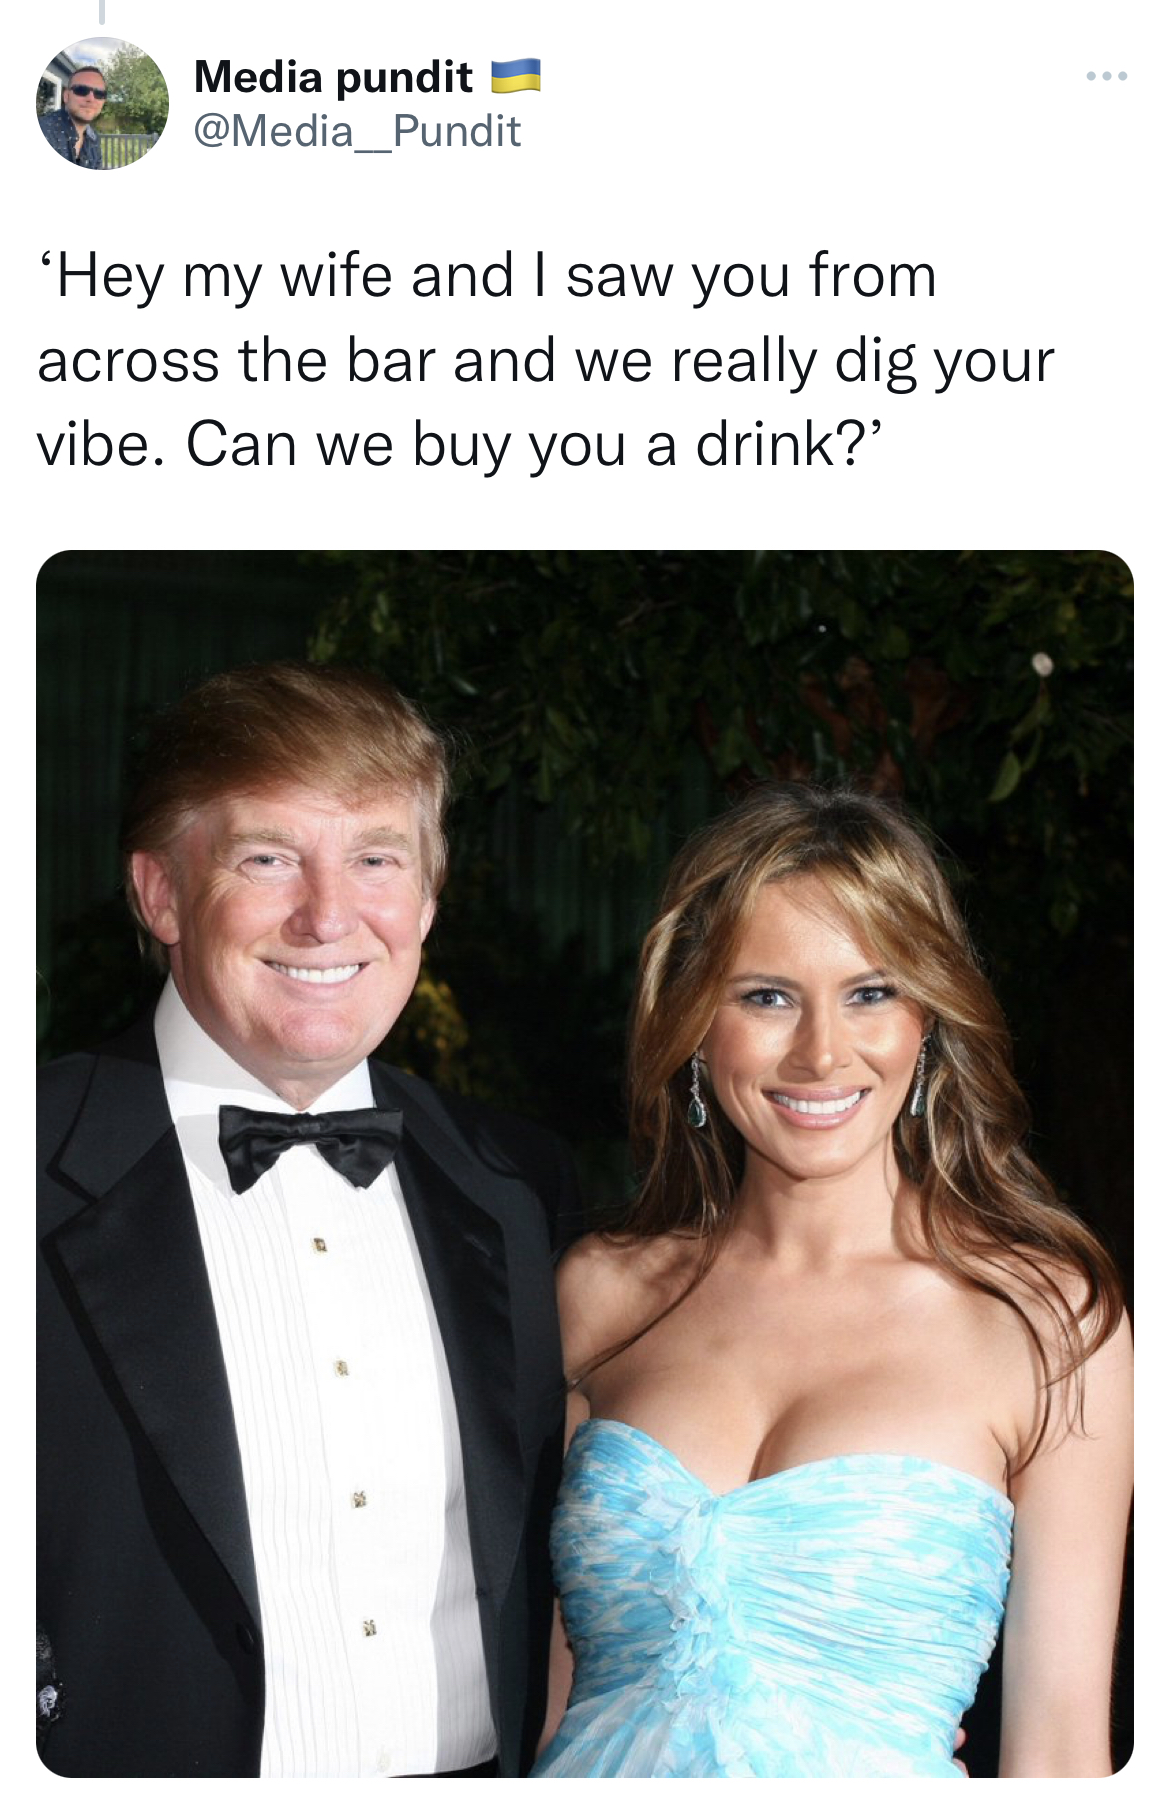 swinger memes across the bar - mile - Media pundit 'Hey my wife and I saw you from across the bar and we really dig your vibe. Can we buy you a drink?"